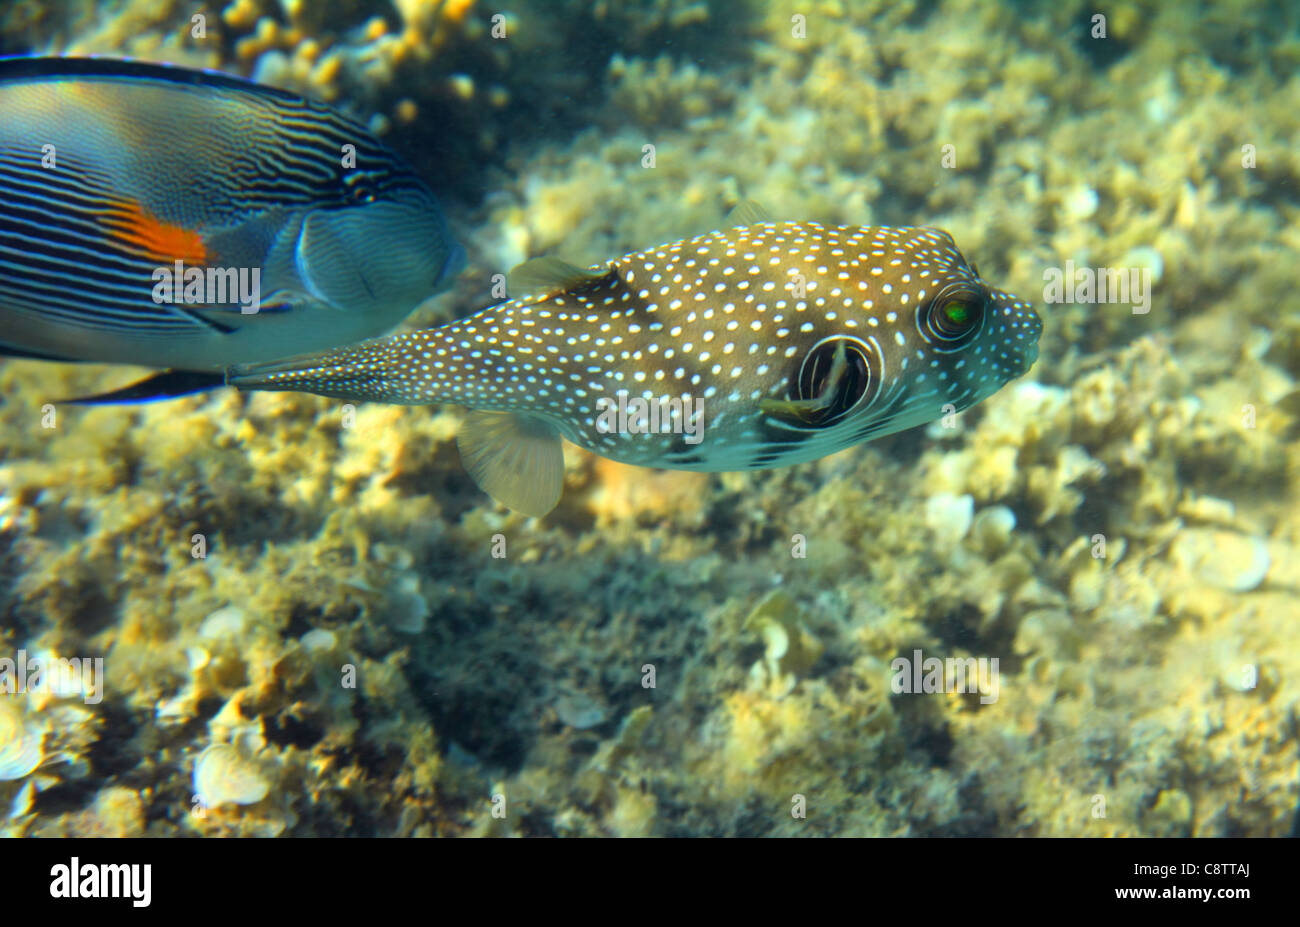 underwater in Red sea - Whitespotted puffer fish Stock Photo